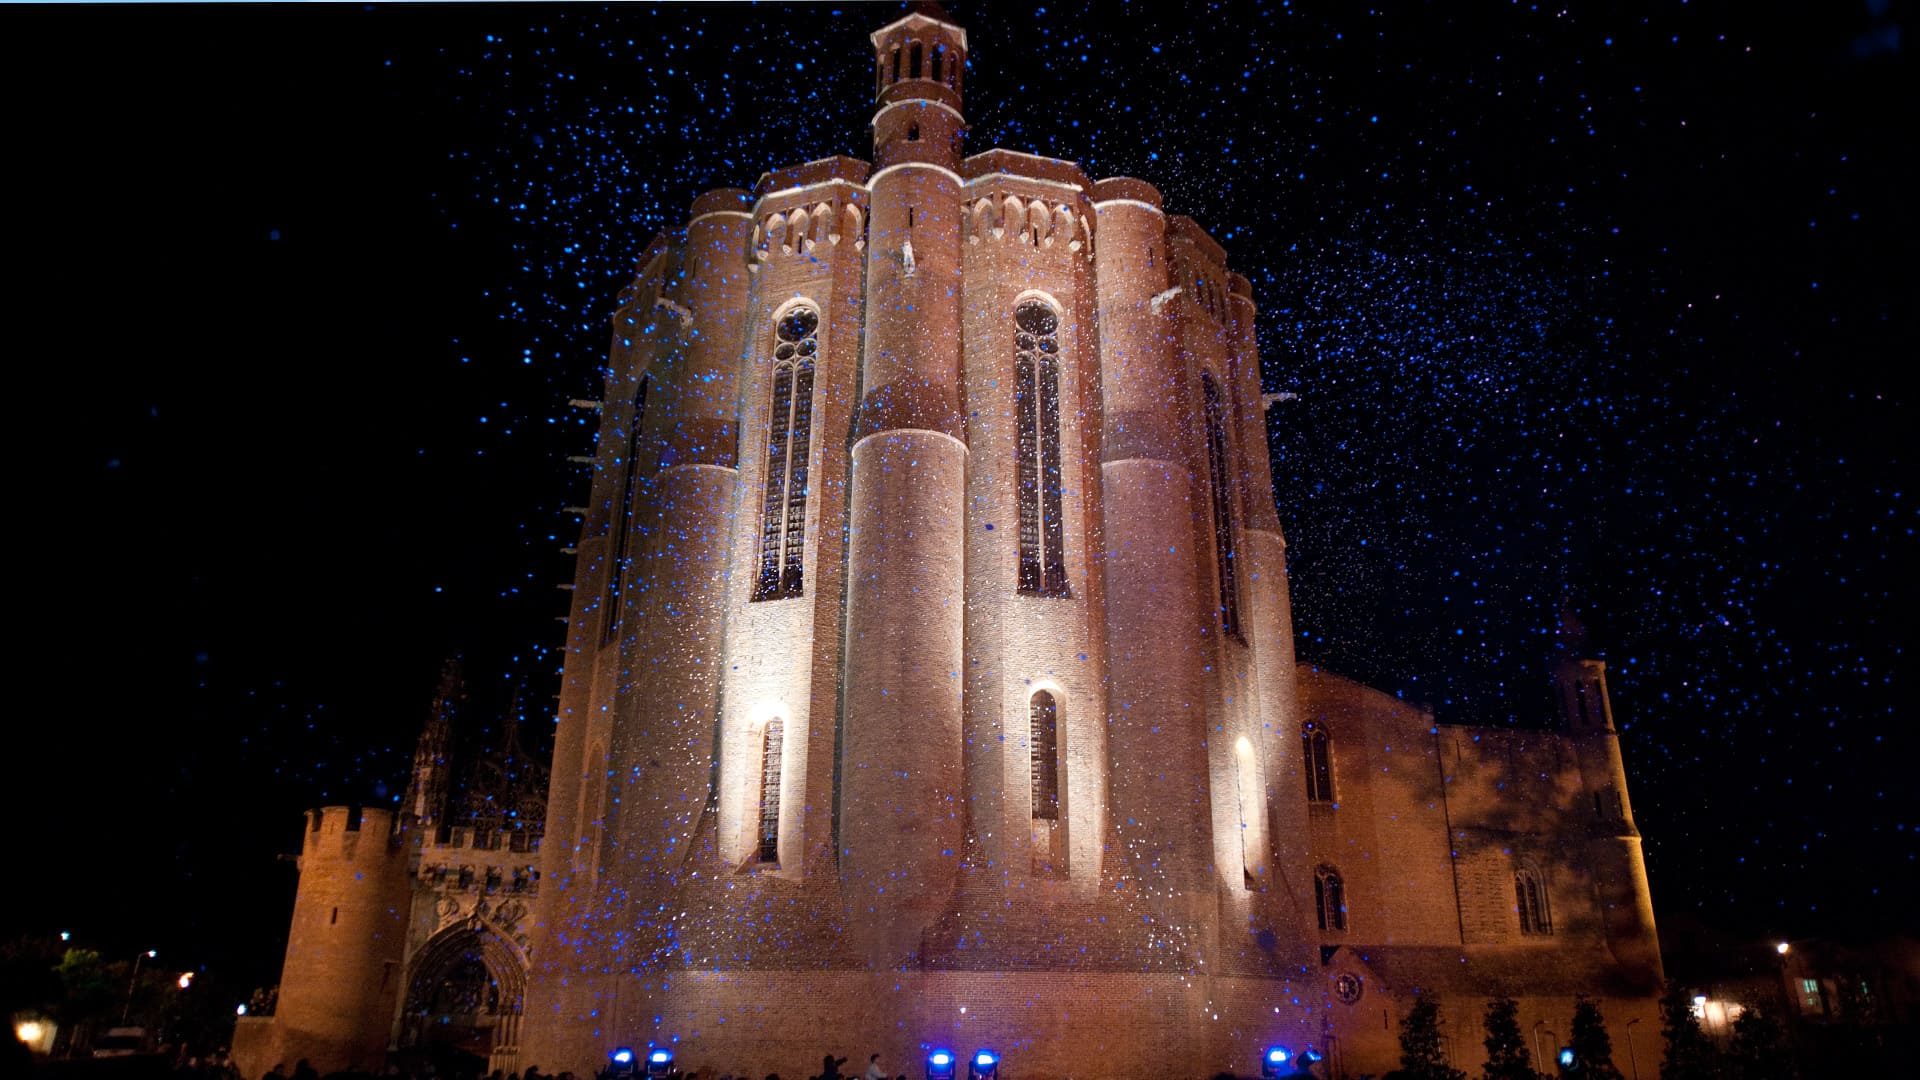 Albi dynamic city: many cultural and sporting events in a beautiful urban setting